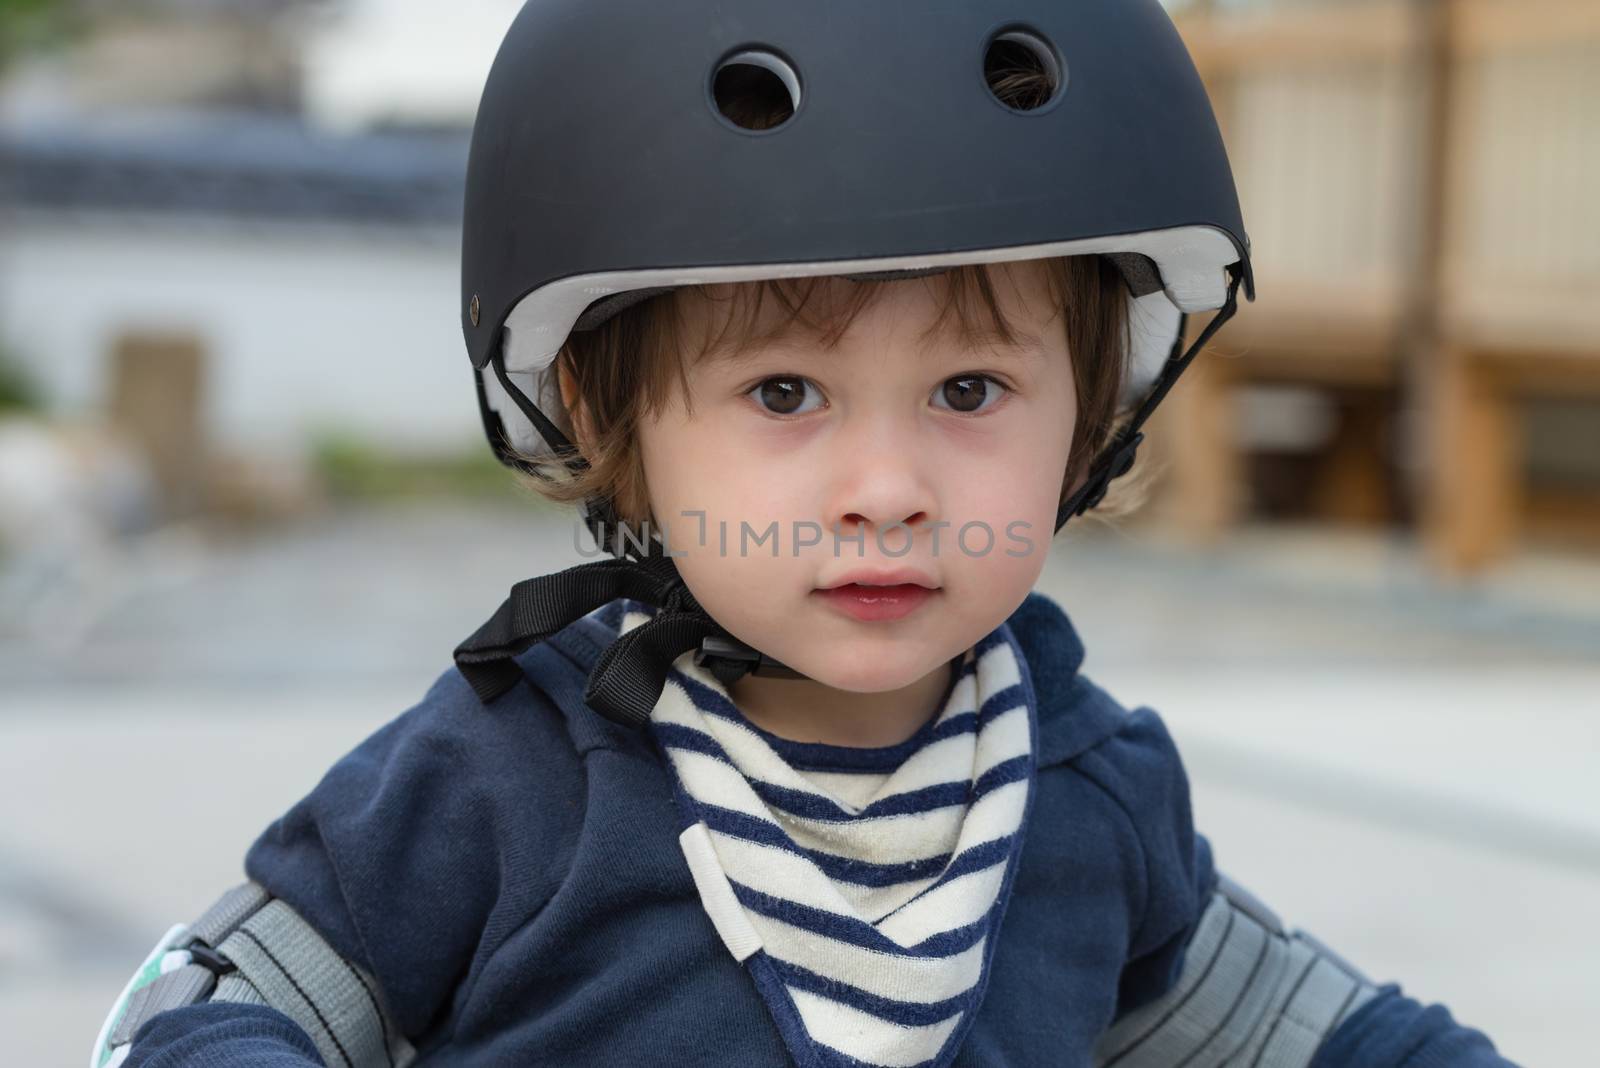 Cute Boy with Bicycle Helmet by justtscott